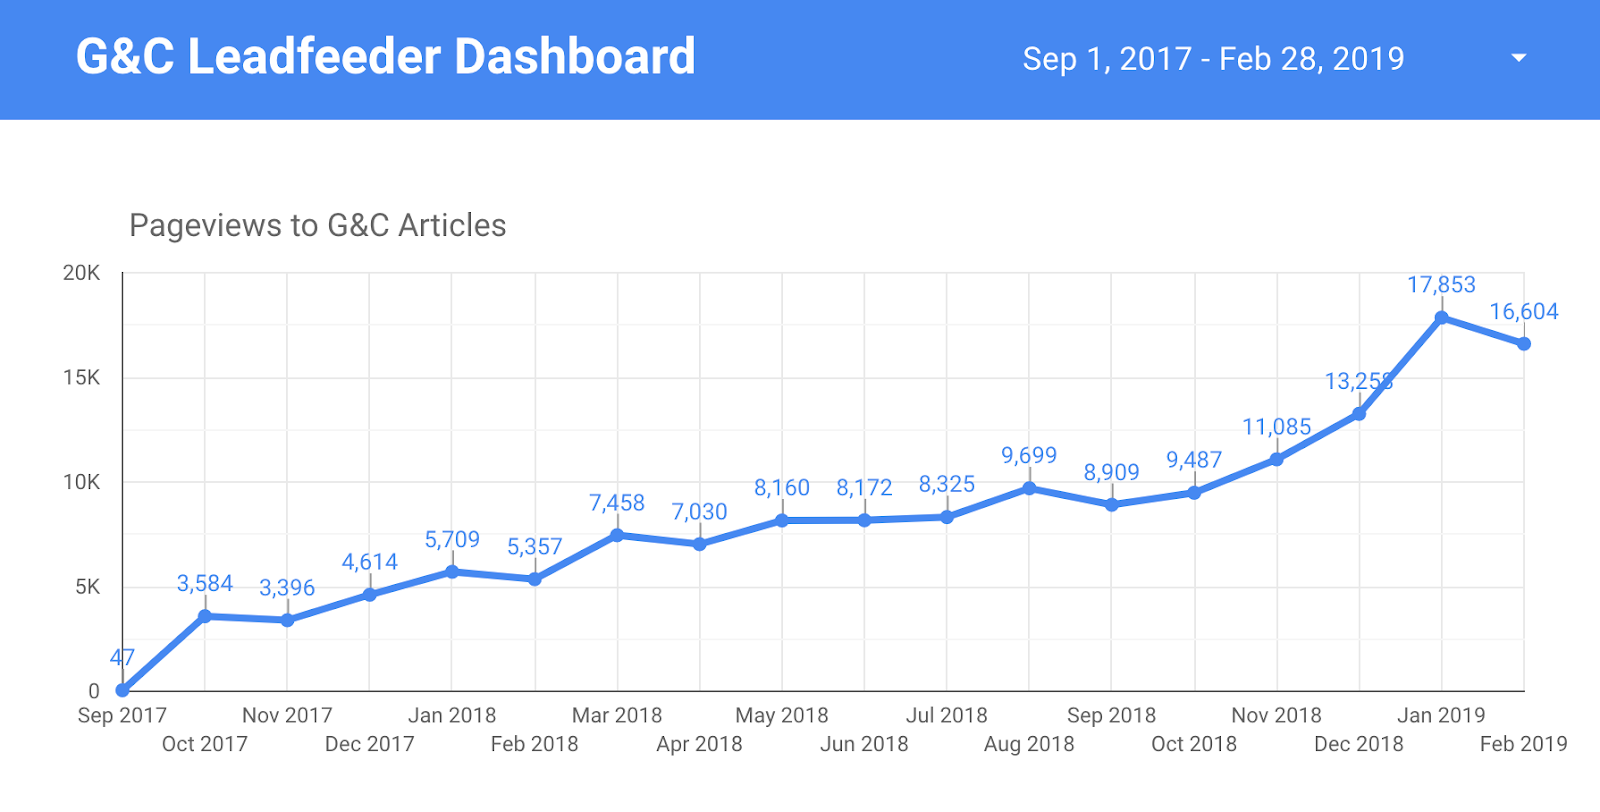 Pageviews to G&C articles for Leadfeeder